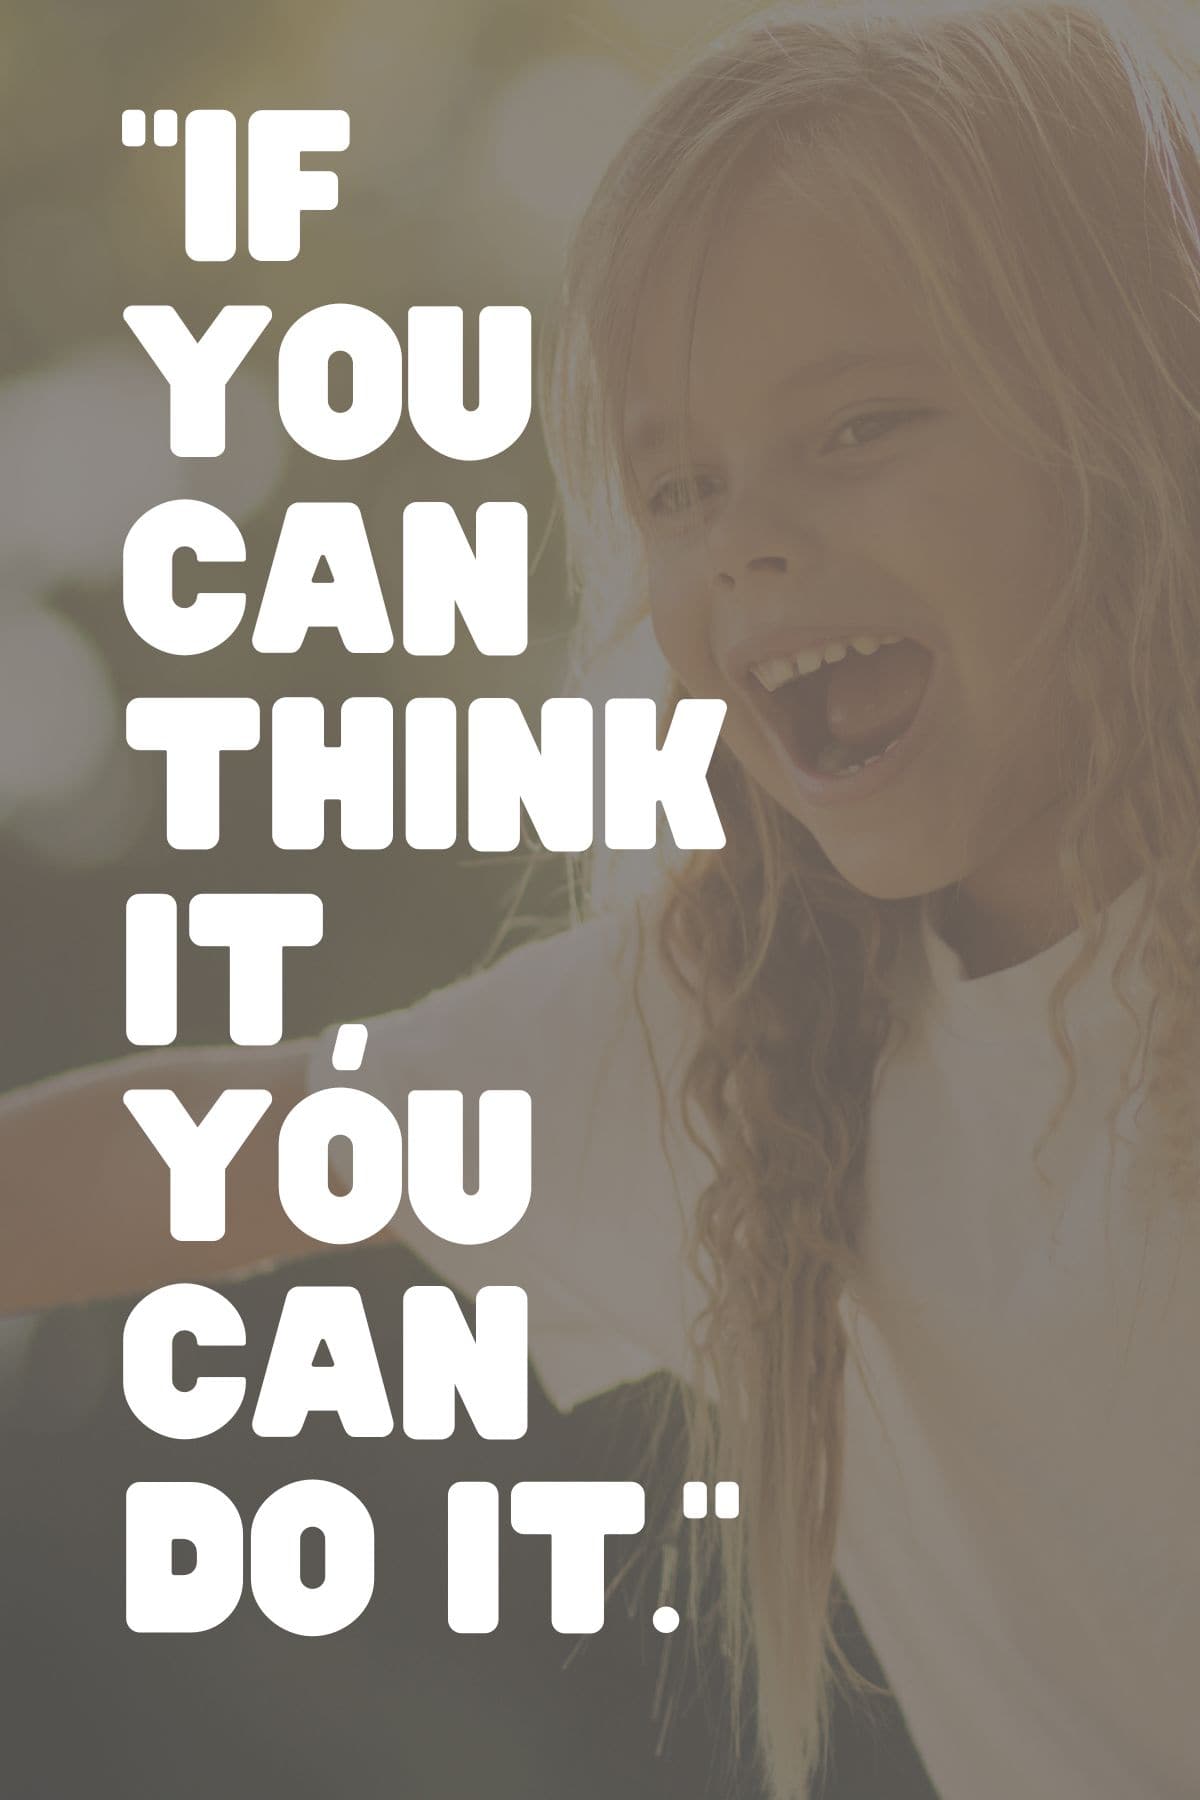 "If you can think it, you can do it." - Walt Disney